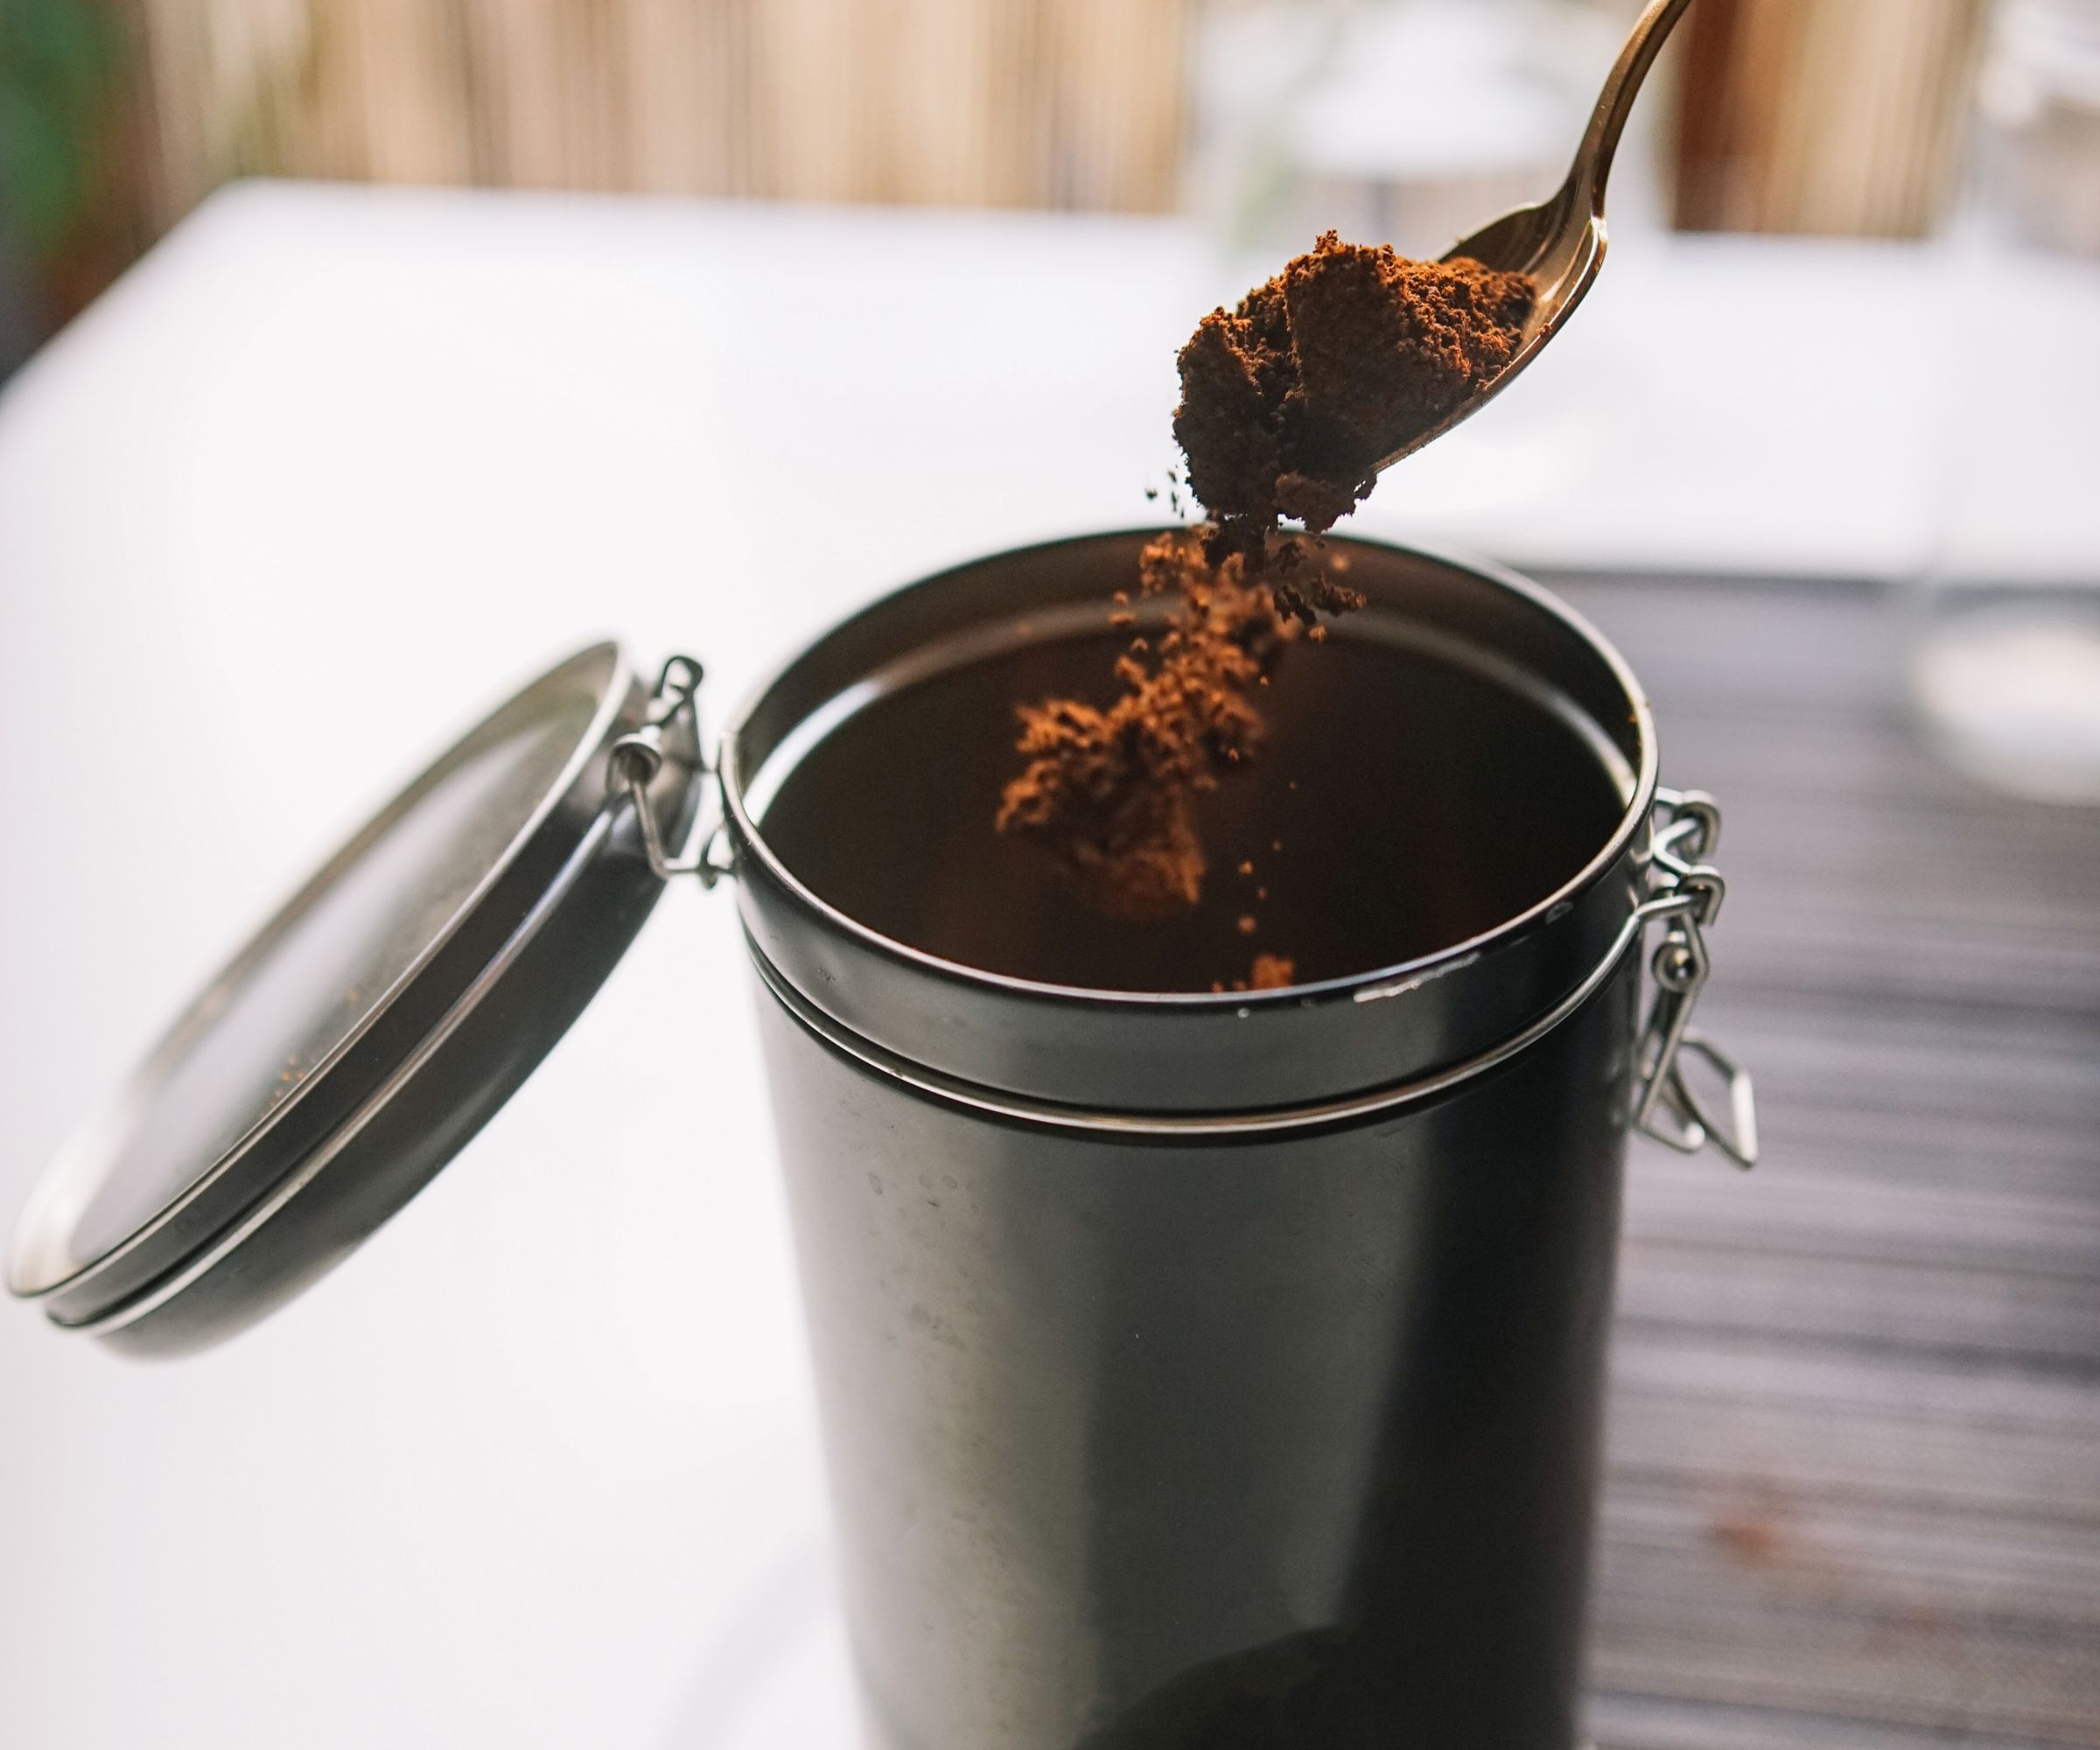 Instant coffee being scooped out a cannister